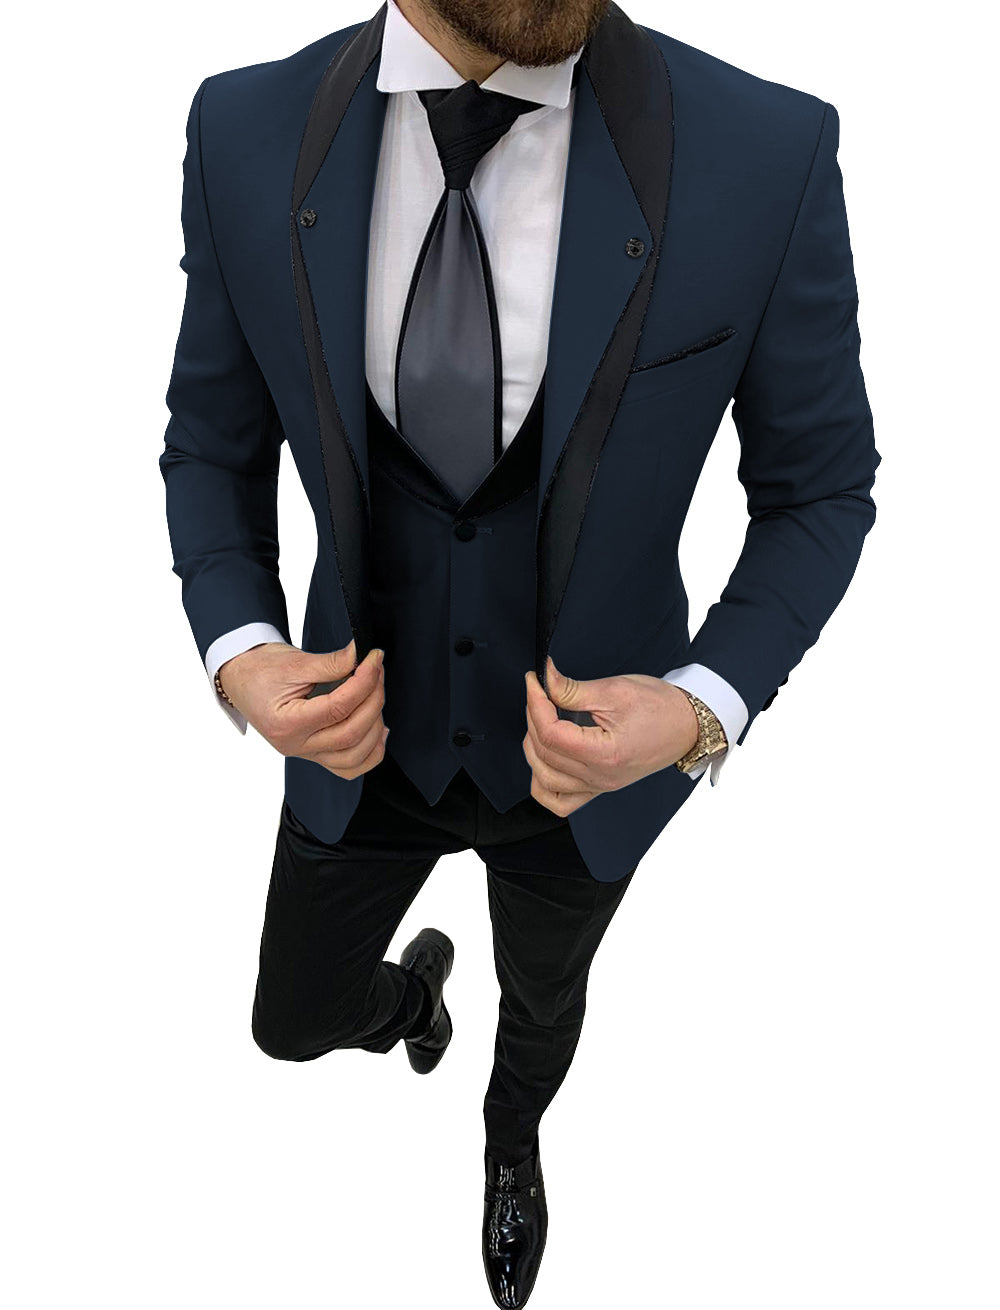 Common sense you must know about buying a suit